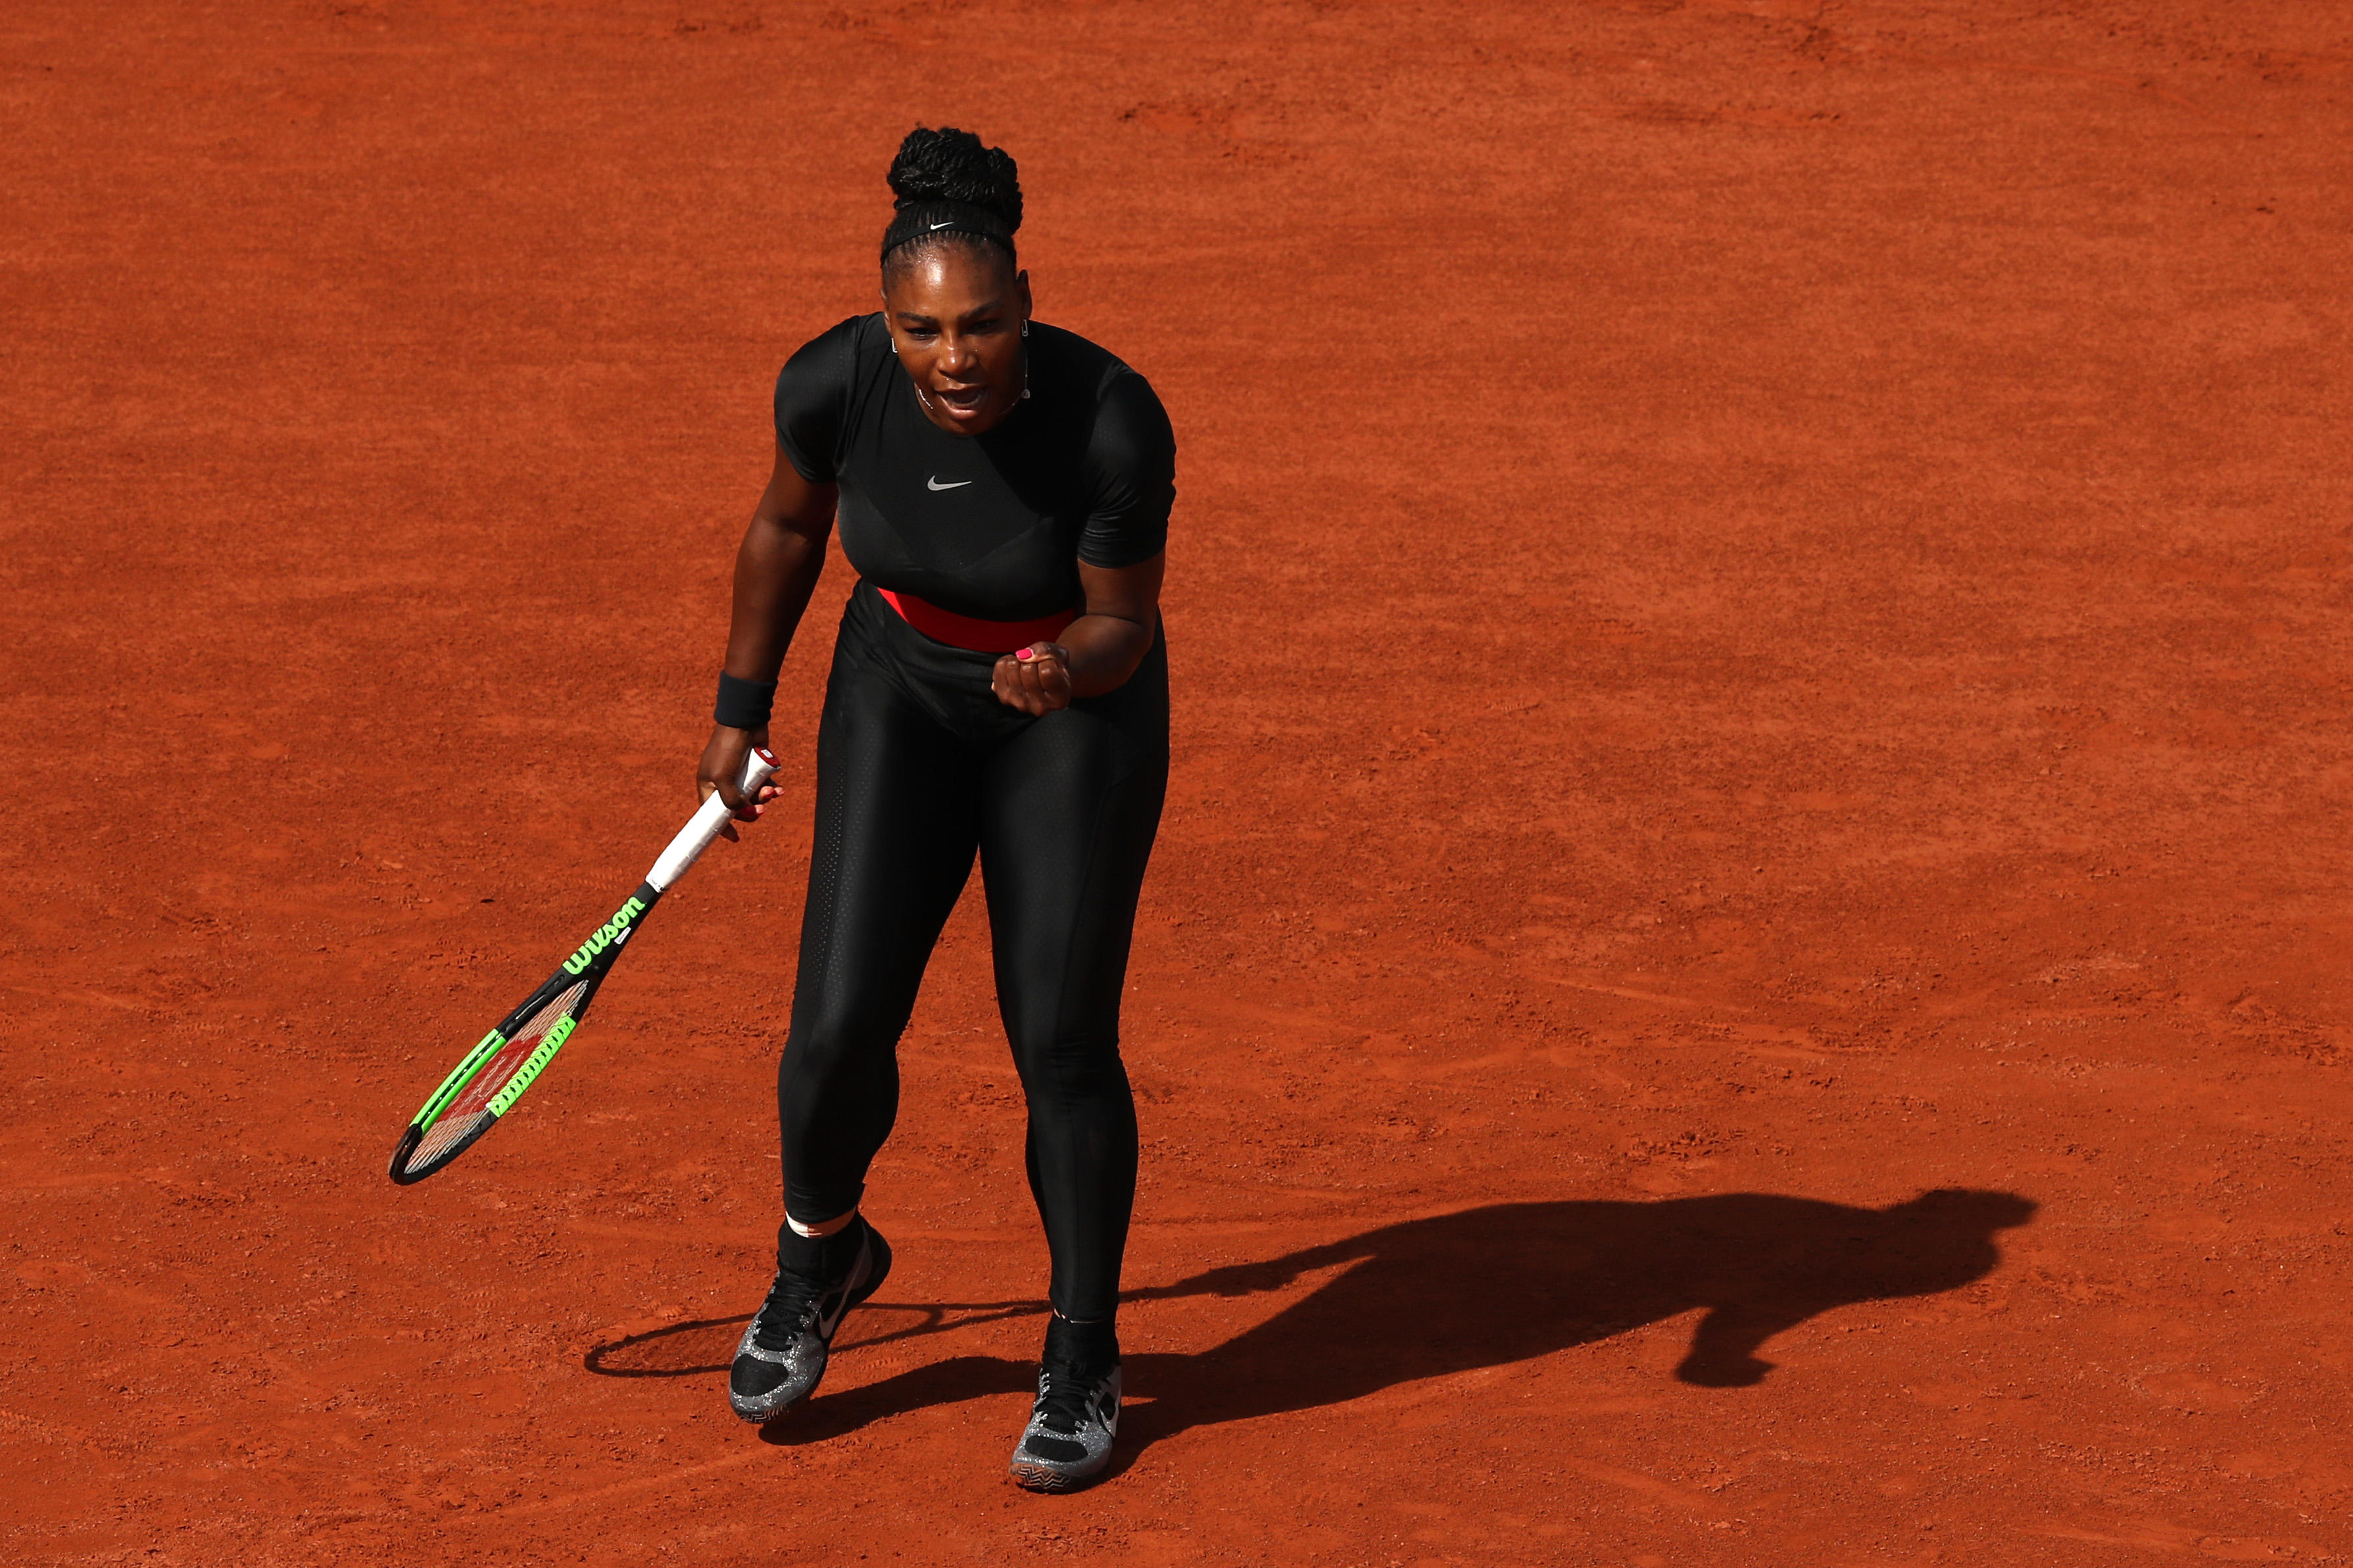 Serena banned from wearing catsuit as French Open changes rules - CBS